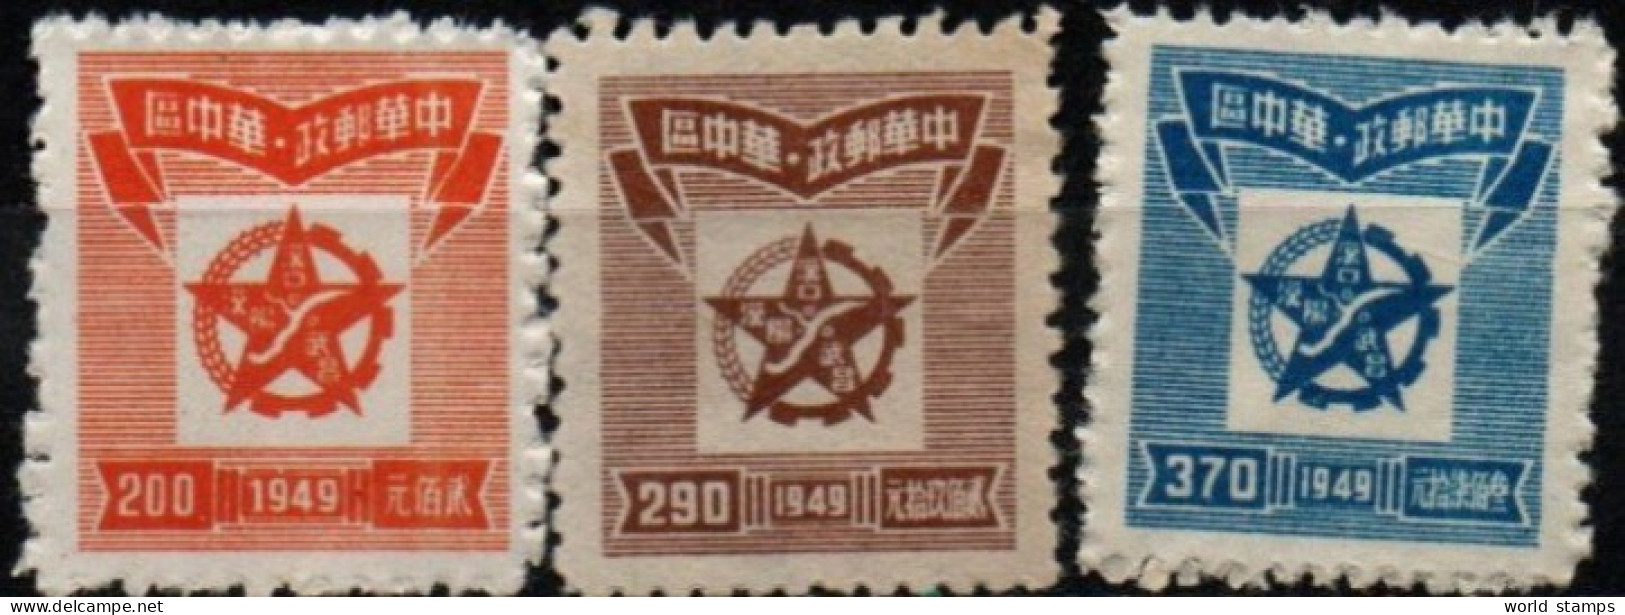 CHINE CENTRALE 1949 SANS GOMME - China Central 1948-49